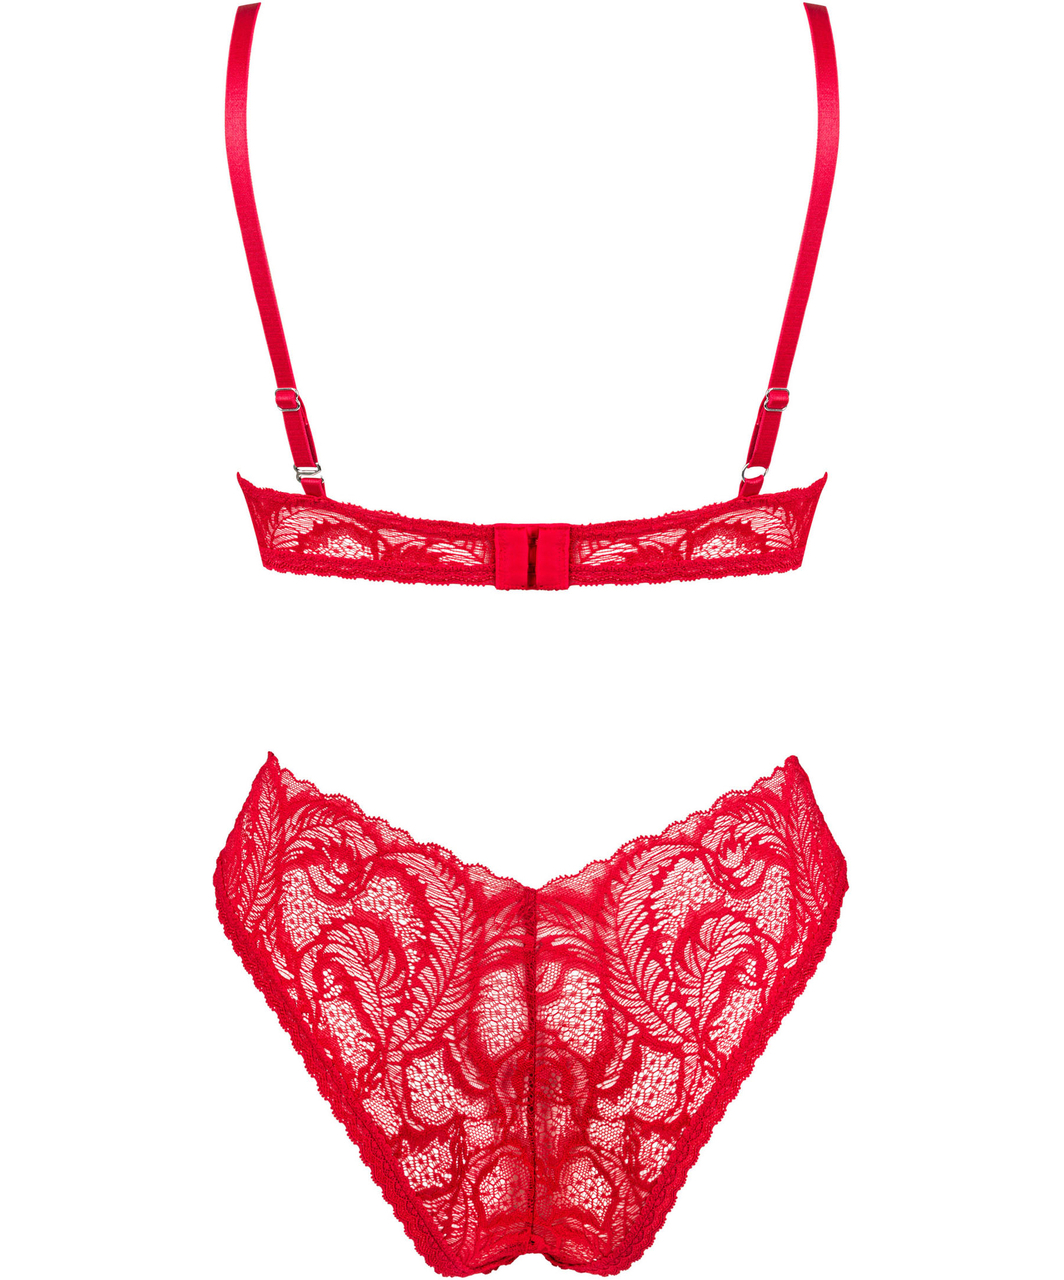 Obsessive Atenica red lace lingerie set